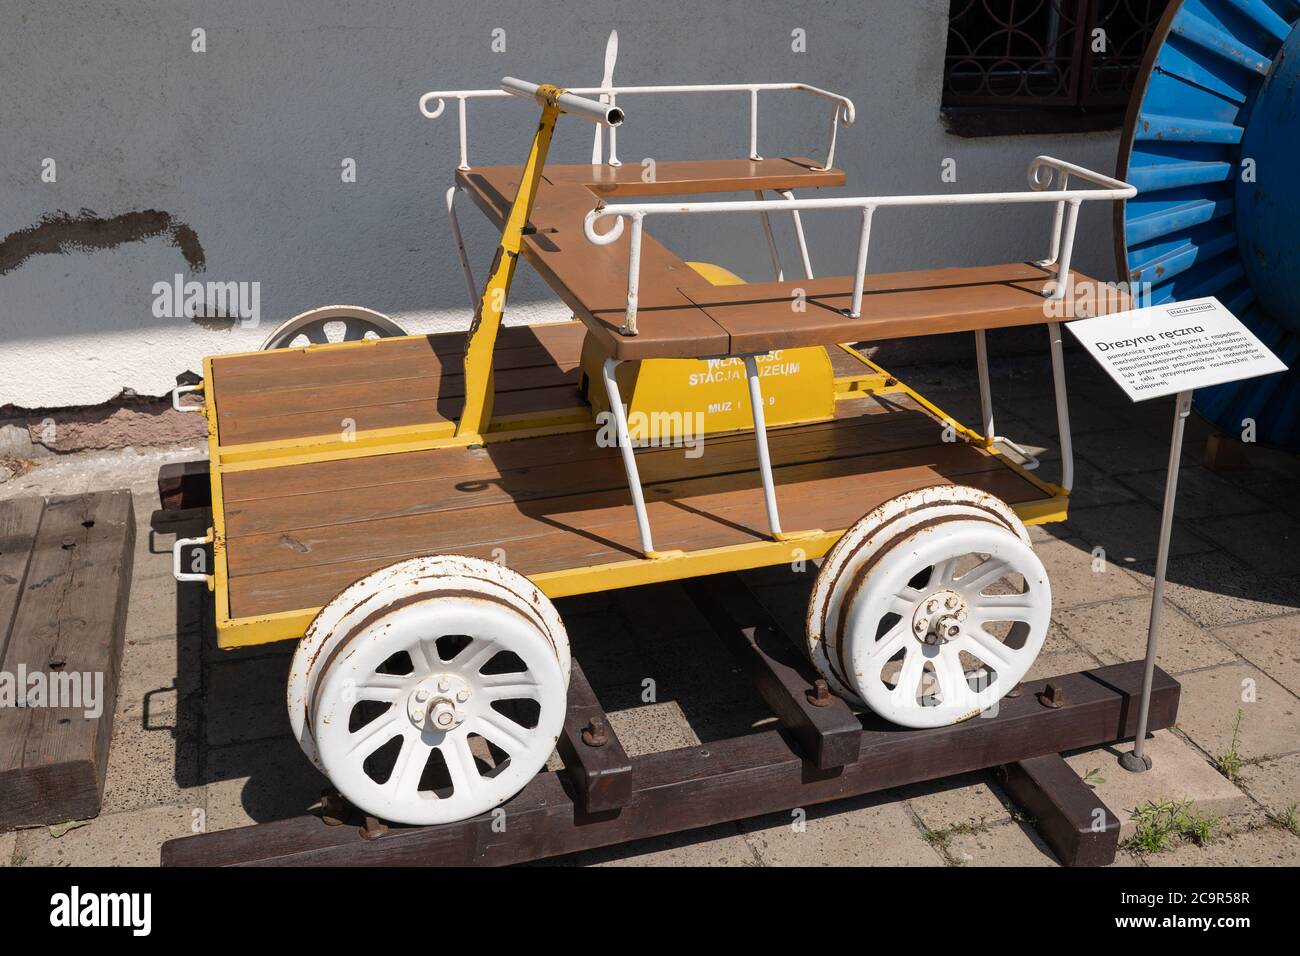 Railway handcar (pump trolley, pump car, jigger, velocipede, draisine), railroad car powered by hands of its passengers in Station Museum in Warsaw, P Stock Photo